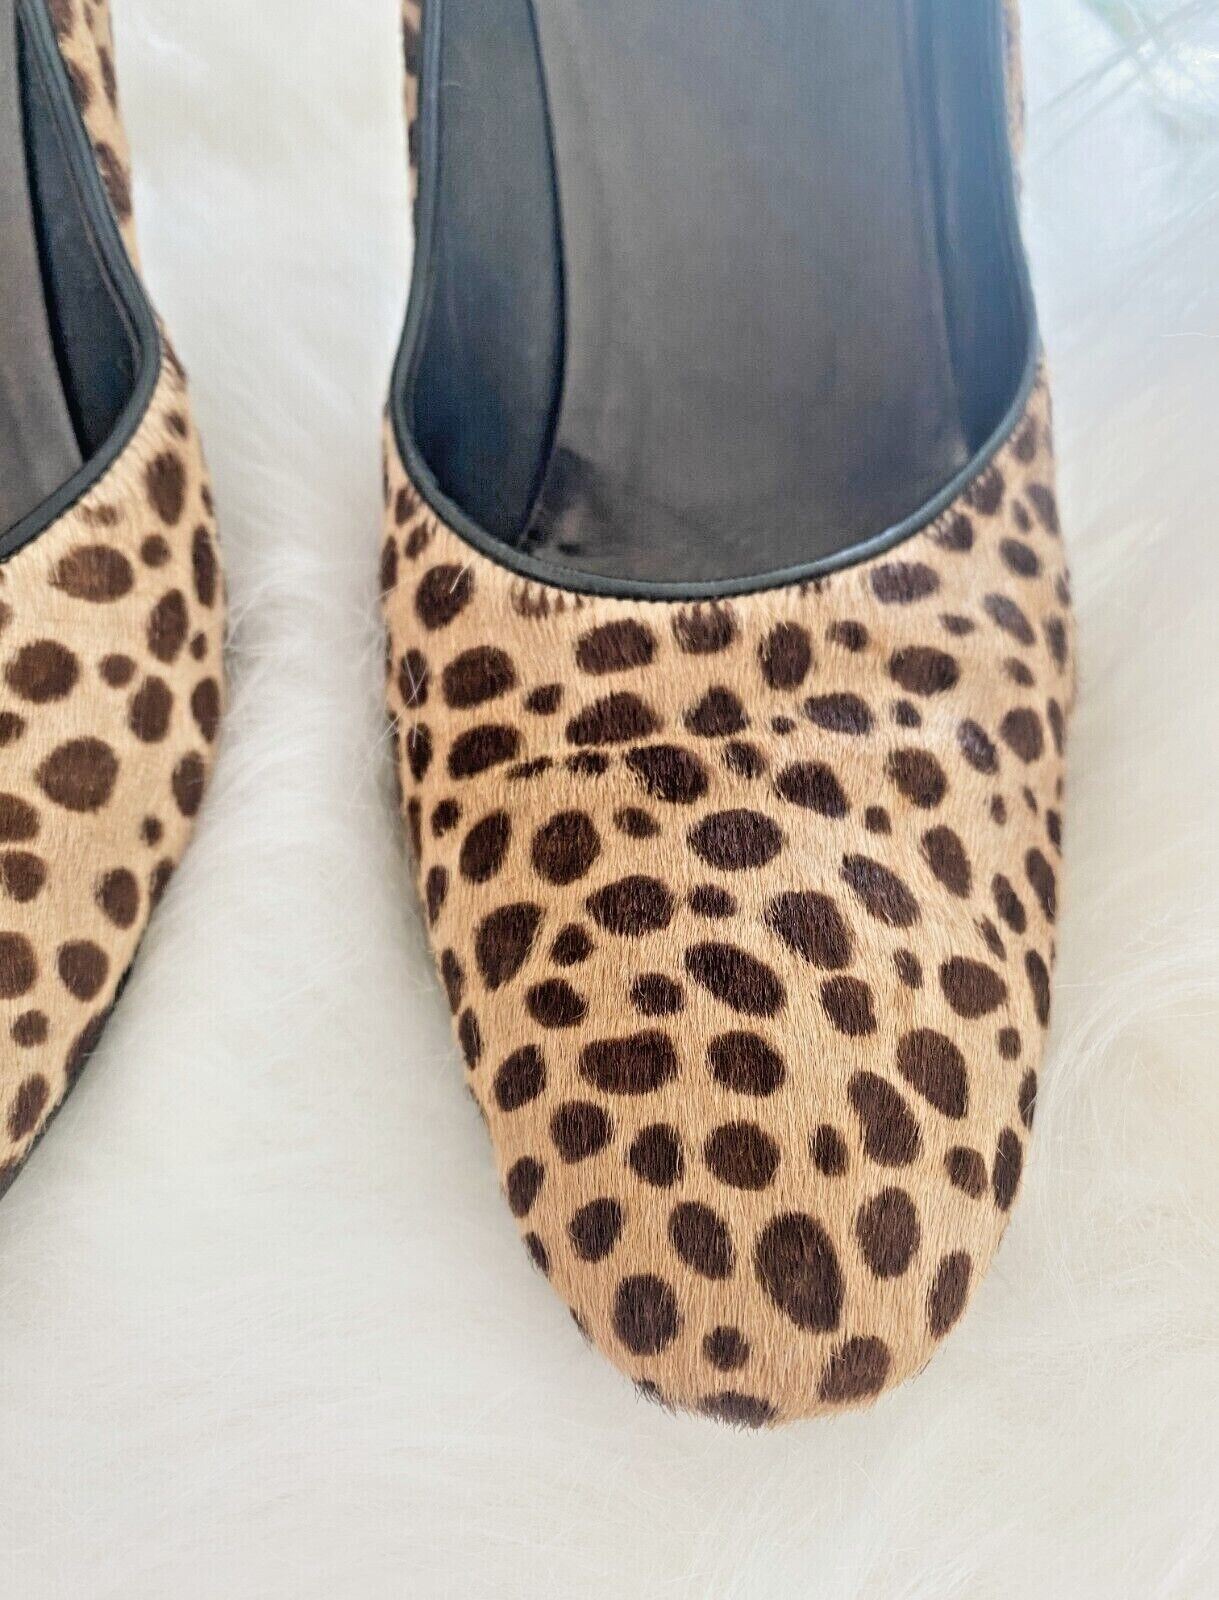 Gianni Versace Leopard Print Heels | Pumps, Great Condition, Leather, Size 38